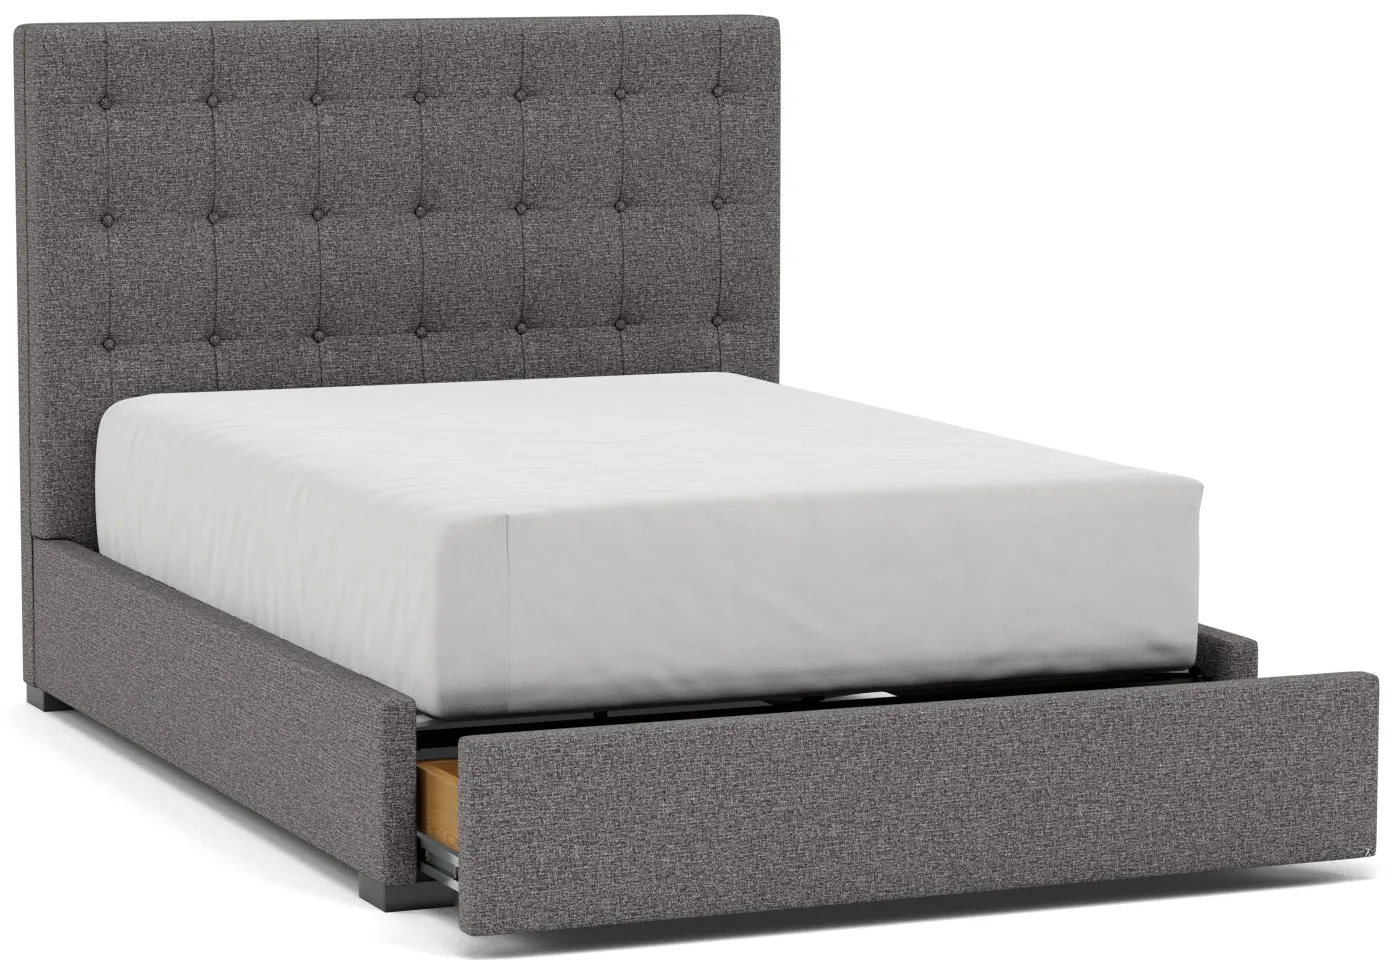 Abby Full Upholstered Storage Bed in Merit Charcoal